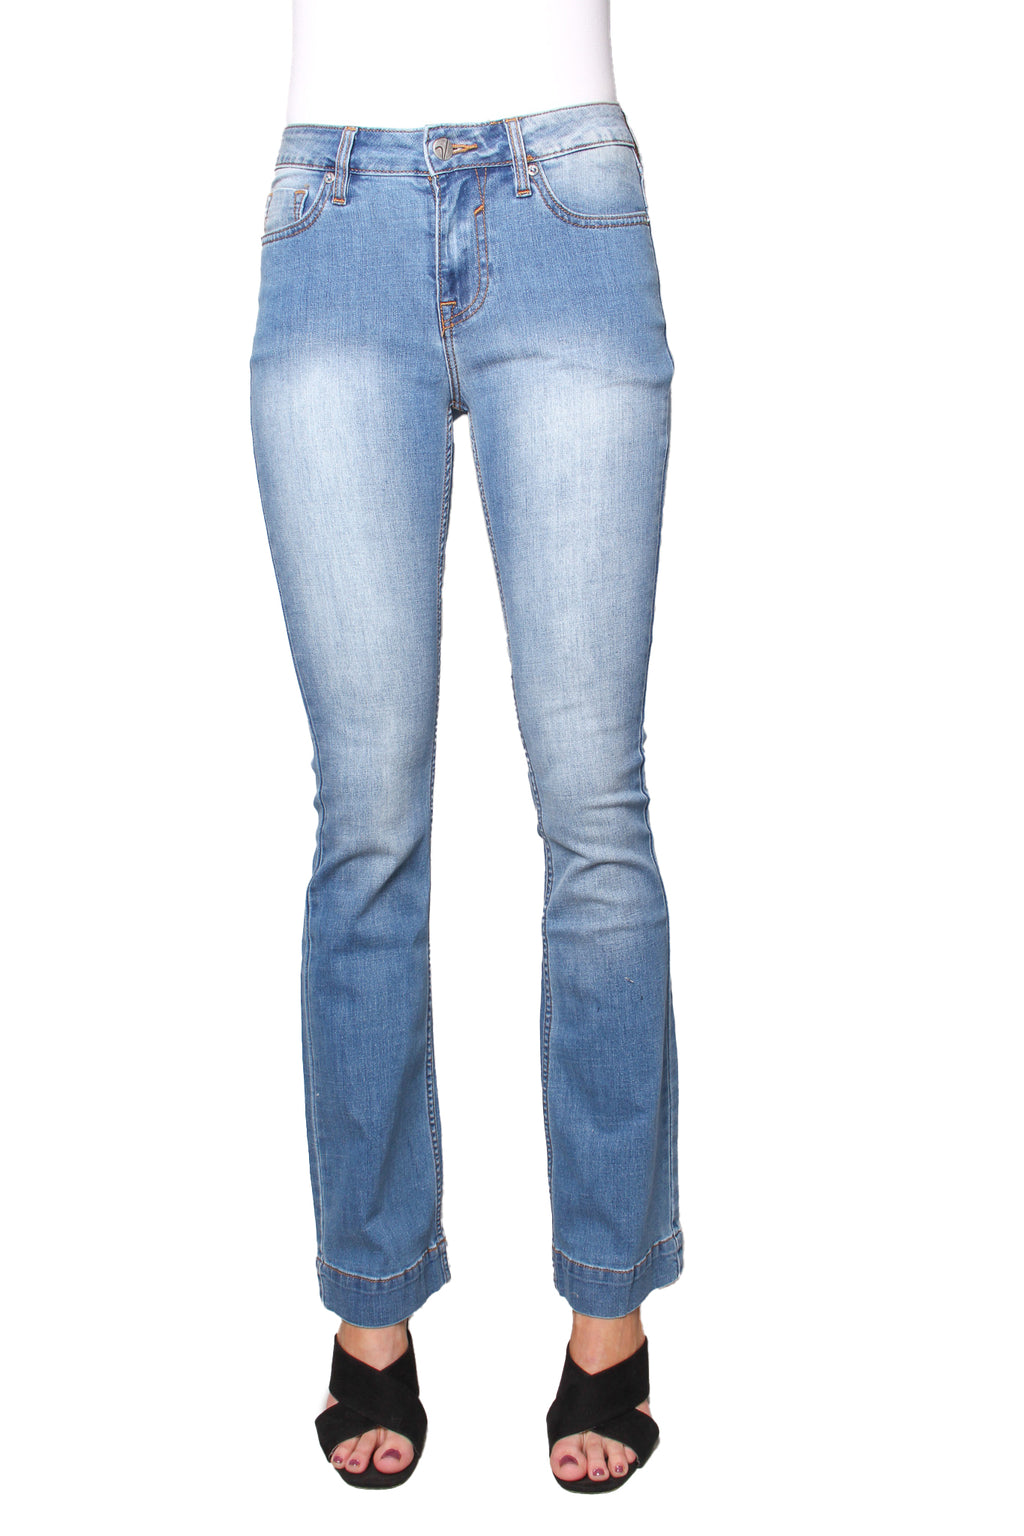 Women's High Waisted Faded Flared Bottom Jeans